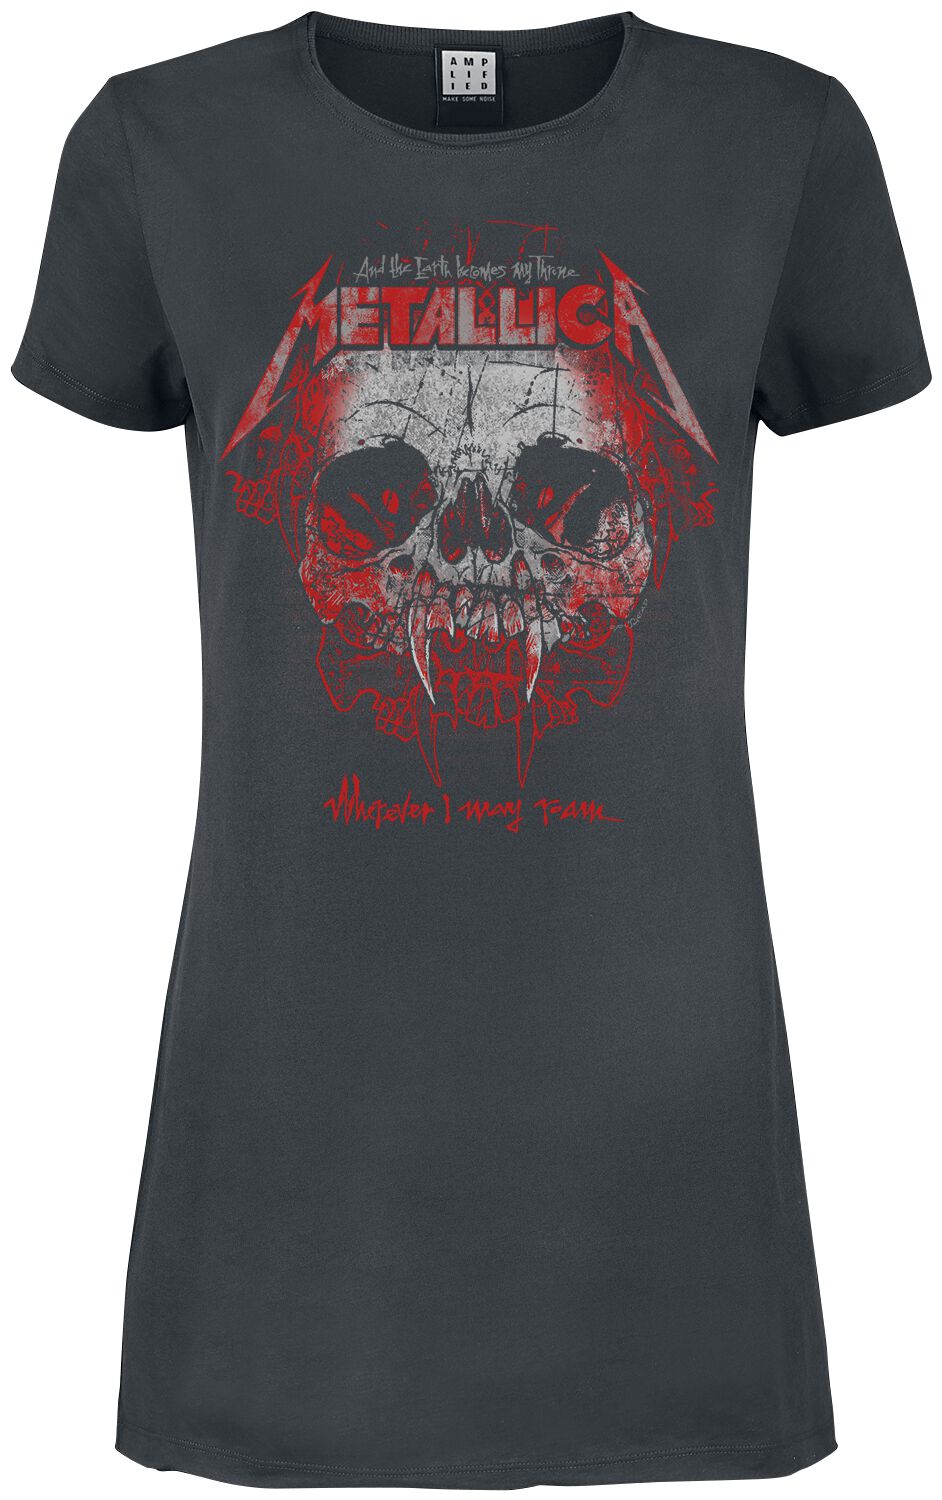 Robe courte de Metallica - Amplified Collection - Wherever I May Roam - XS à XXL - pour Femme - anth